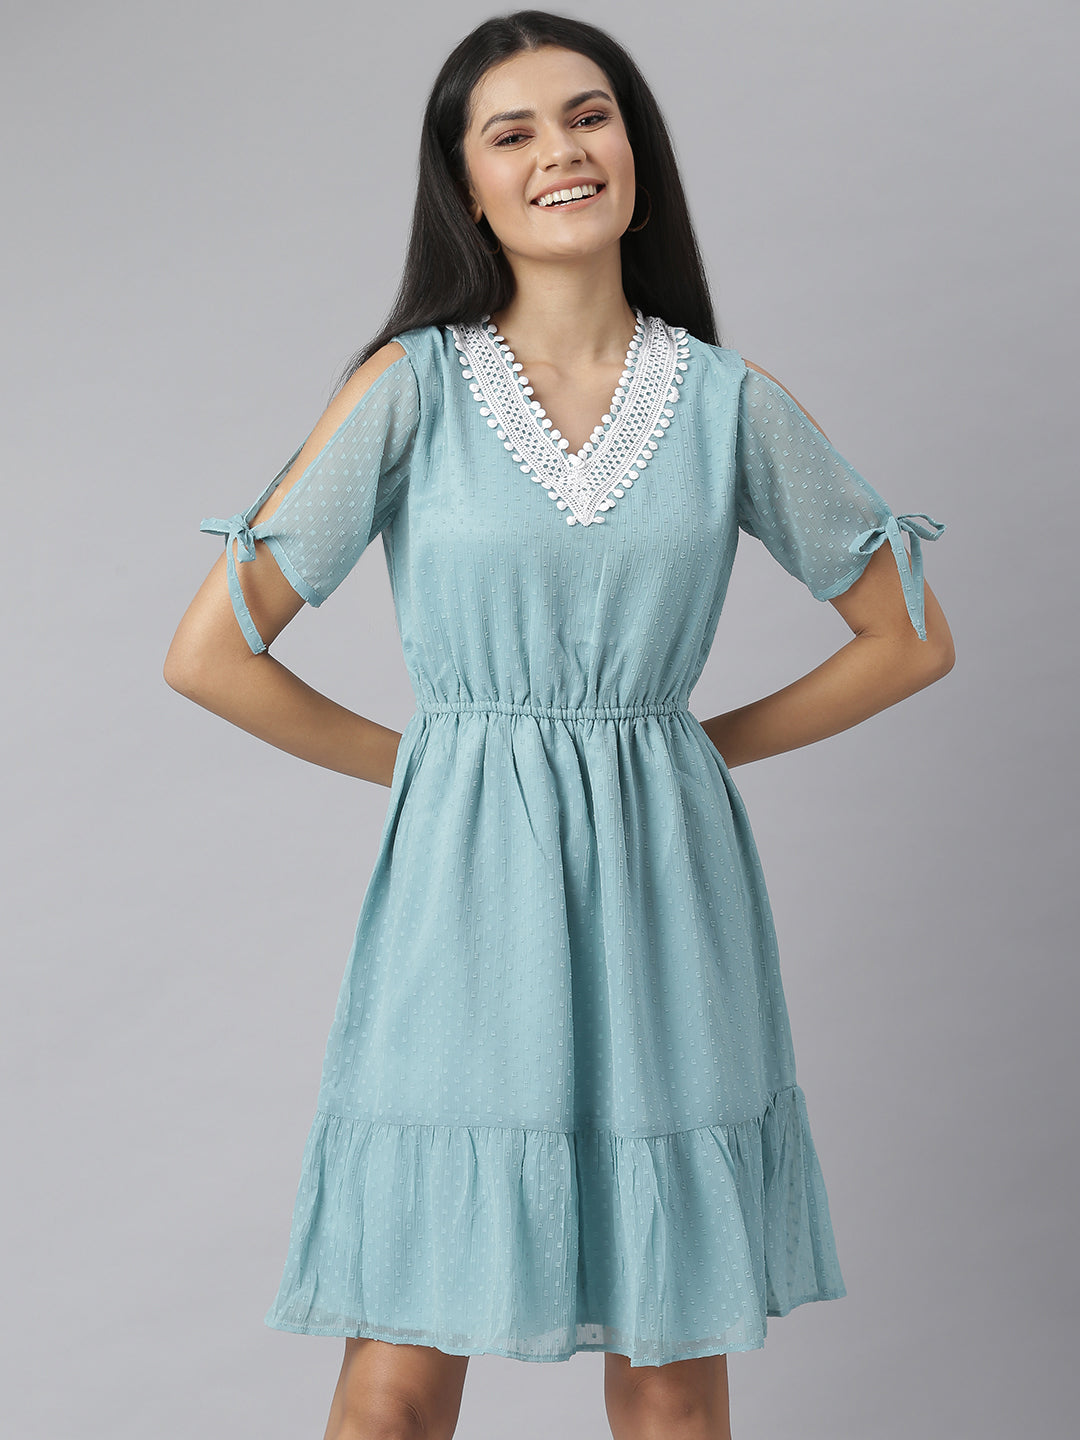 Women's Green Self Design Dress with Neck Lace